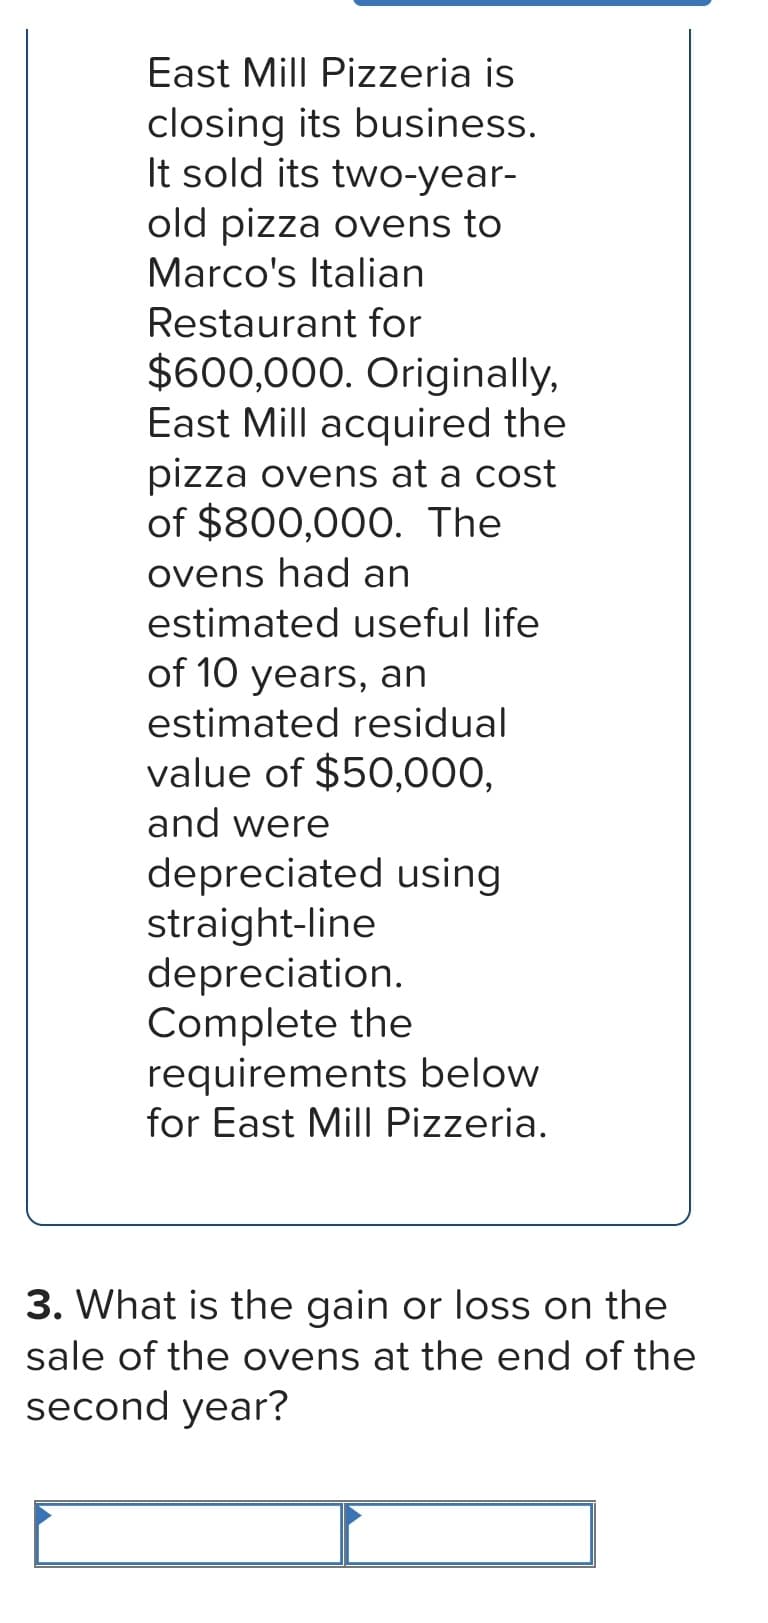 East Mill Pizzeria is
closing its business.
It sold its two-year-
old pizza ovens to
Marco's Italian
Restaurant for
$600,000. Originally,
East Mill acquired the
pizza ovens at a cost
of $800,000. The
ovens had an
estimated useful life
of 10 years, an
estimated residual
value of $50,000,
and were
depreciated using
straight-line
depreciation.
Complete the
requirements below
for East Mill Pizzeria.
3. What is the gain or loss on the
sale of the ovens at the end of the
second year?
